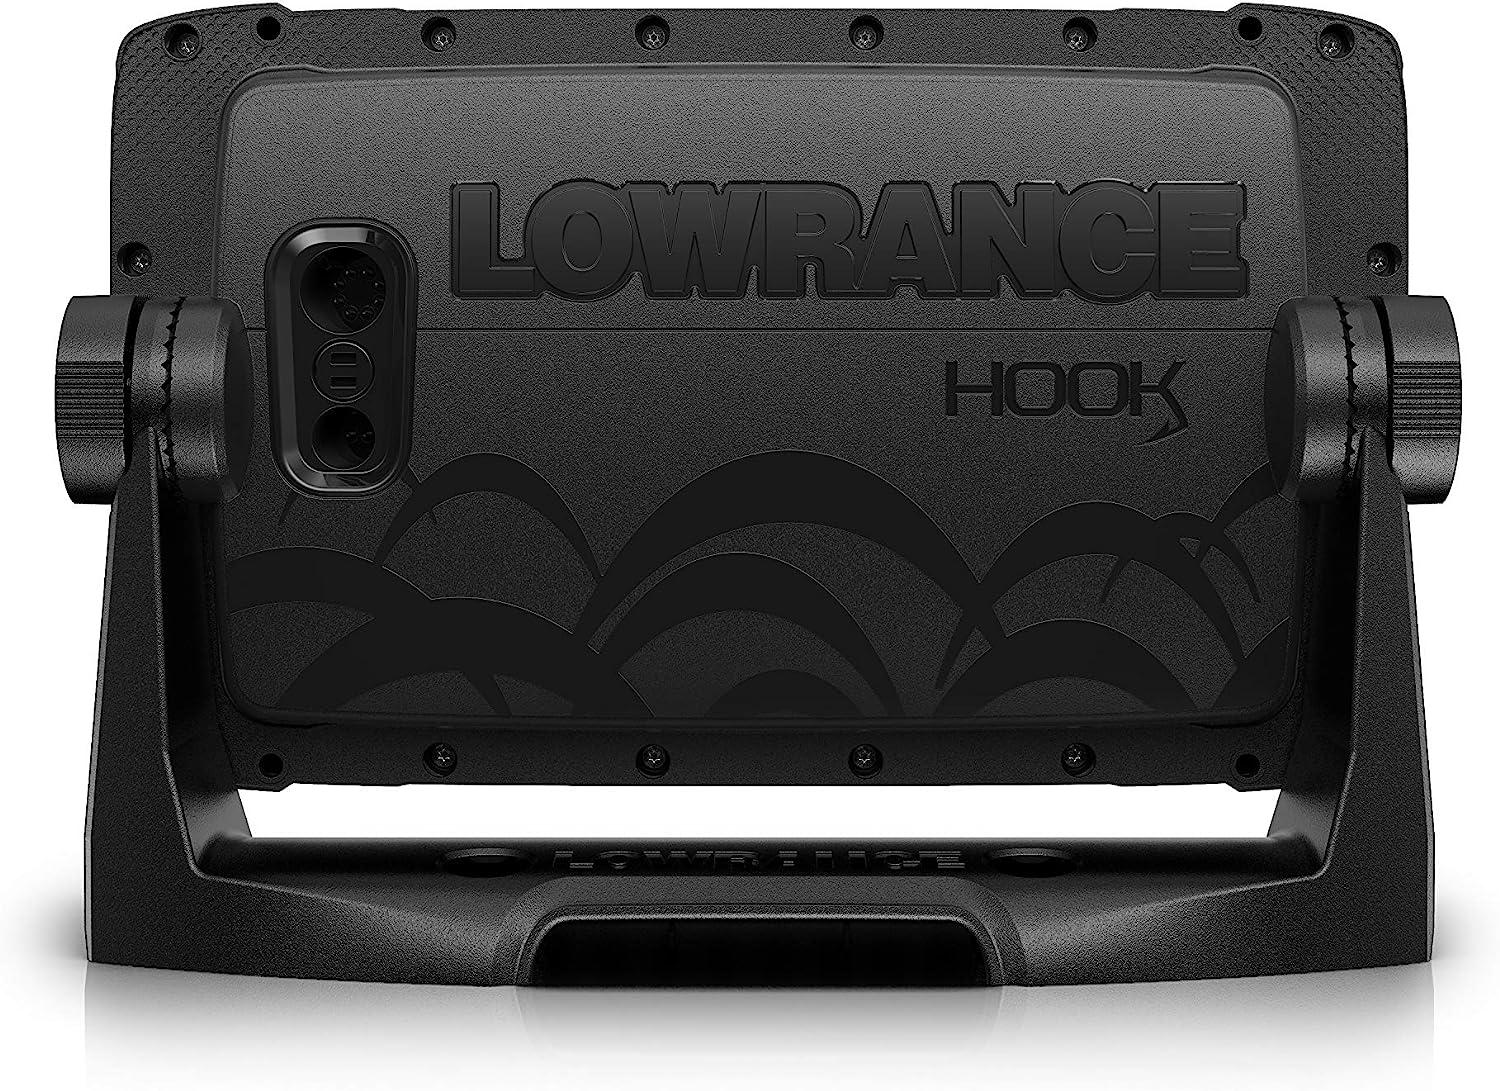 Lowrance Hook Reveal 7 Inch Fish Finders with Transducer, Plus Optional  Preloaded Maps 7 Tripleshot, C-map Contour+ Maps Fish Finder